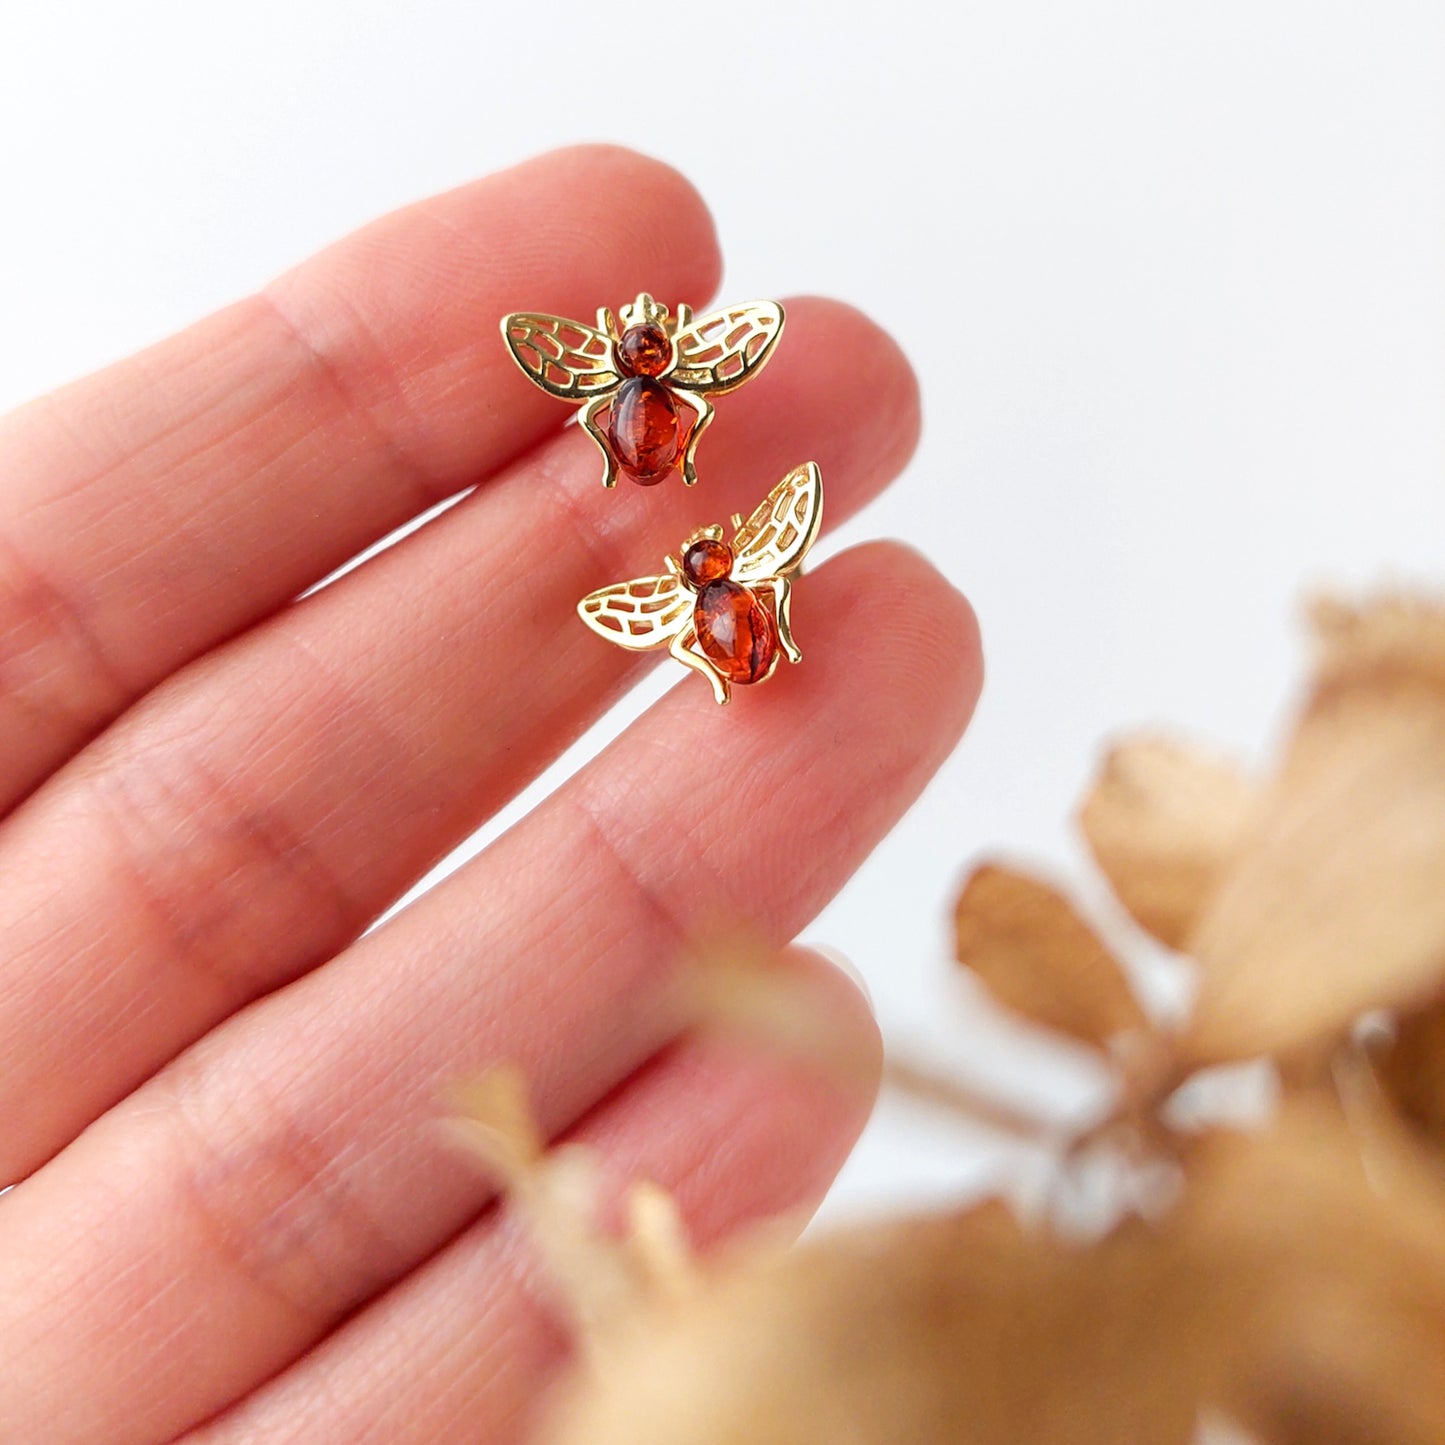 Gold Bee earrings, Amber Honey Bee Earrings, Gold Bee Jewelry, gold stud earrings, boho earrinhs bee birthday gifts for her, bumble bee